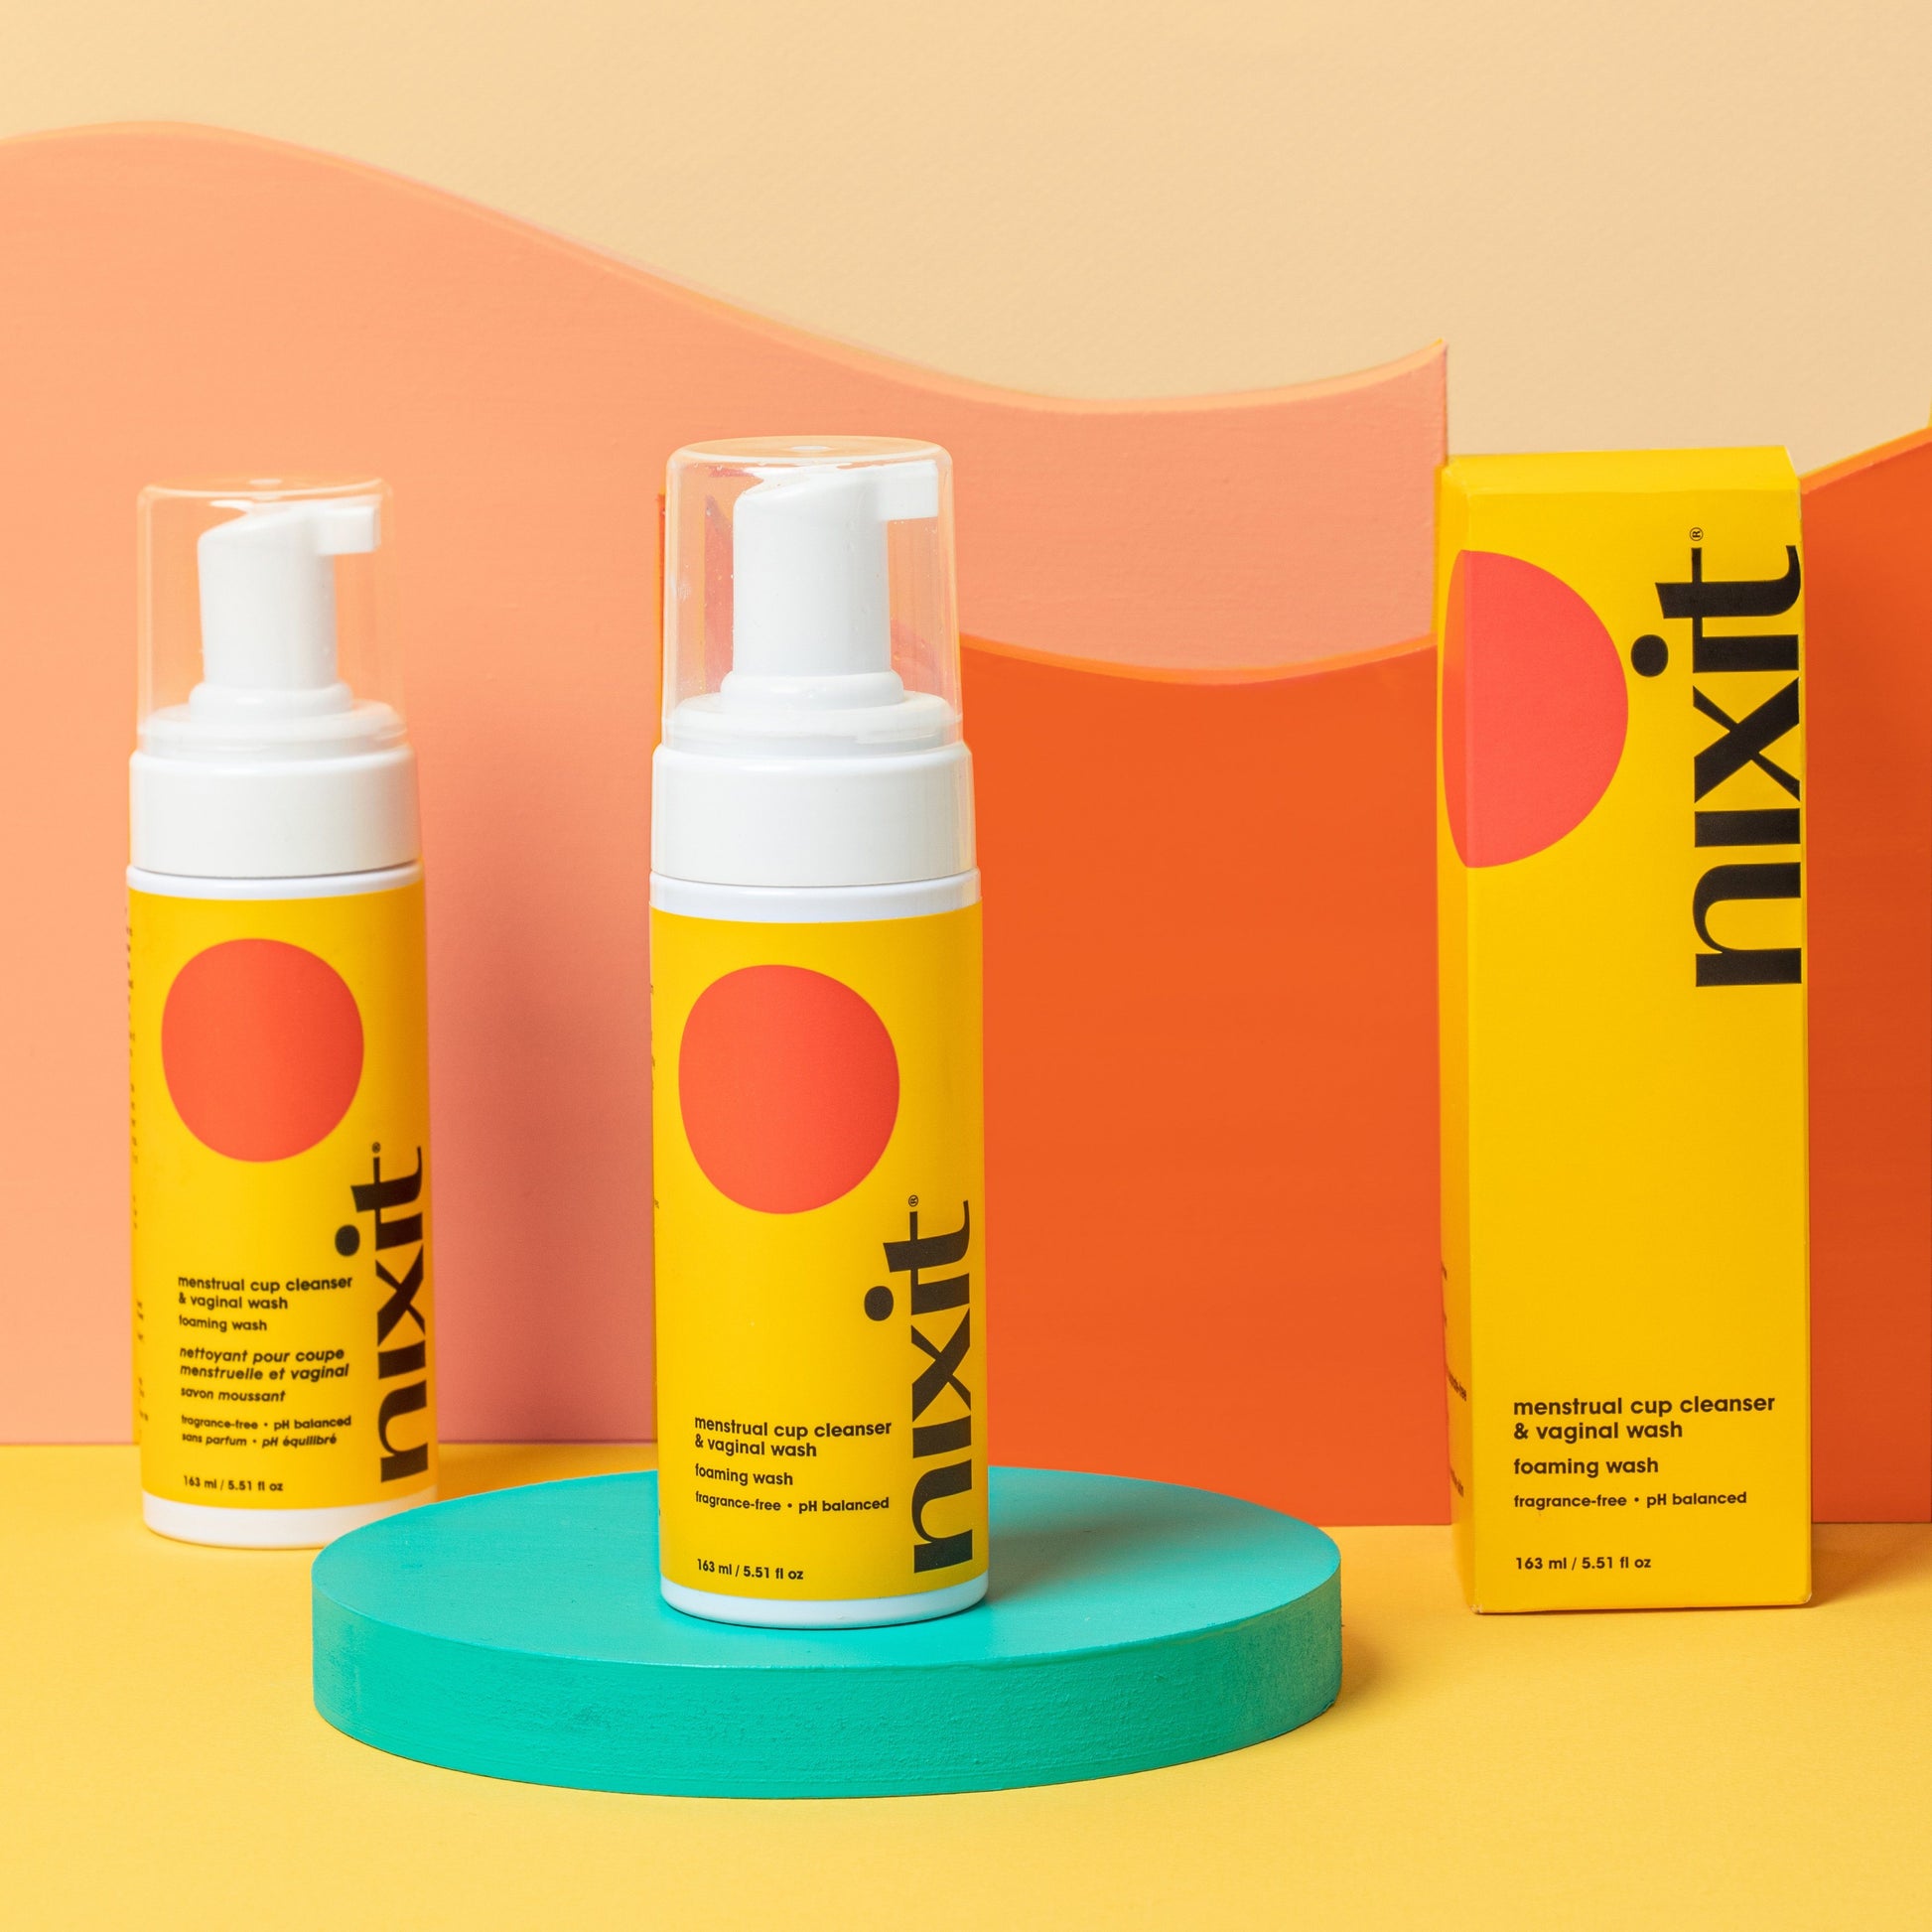 Product photo of nixit menstrual cup cleanser and vaginal wash and product box for period cup care